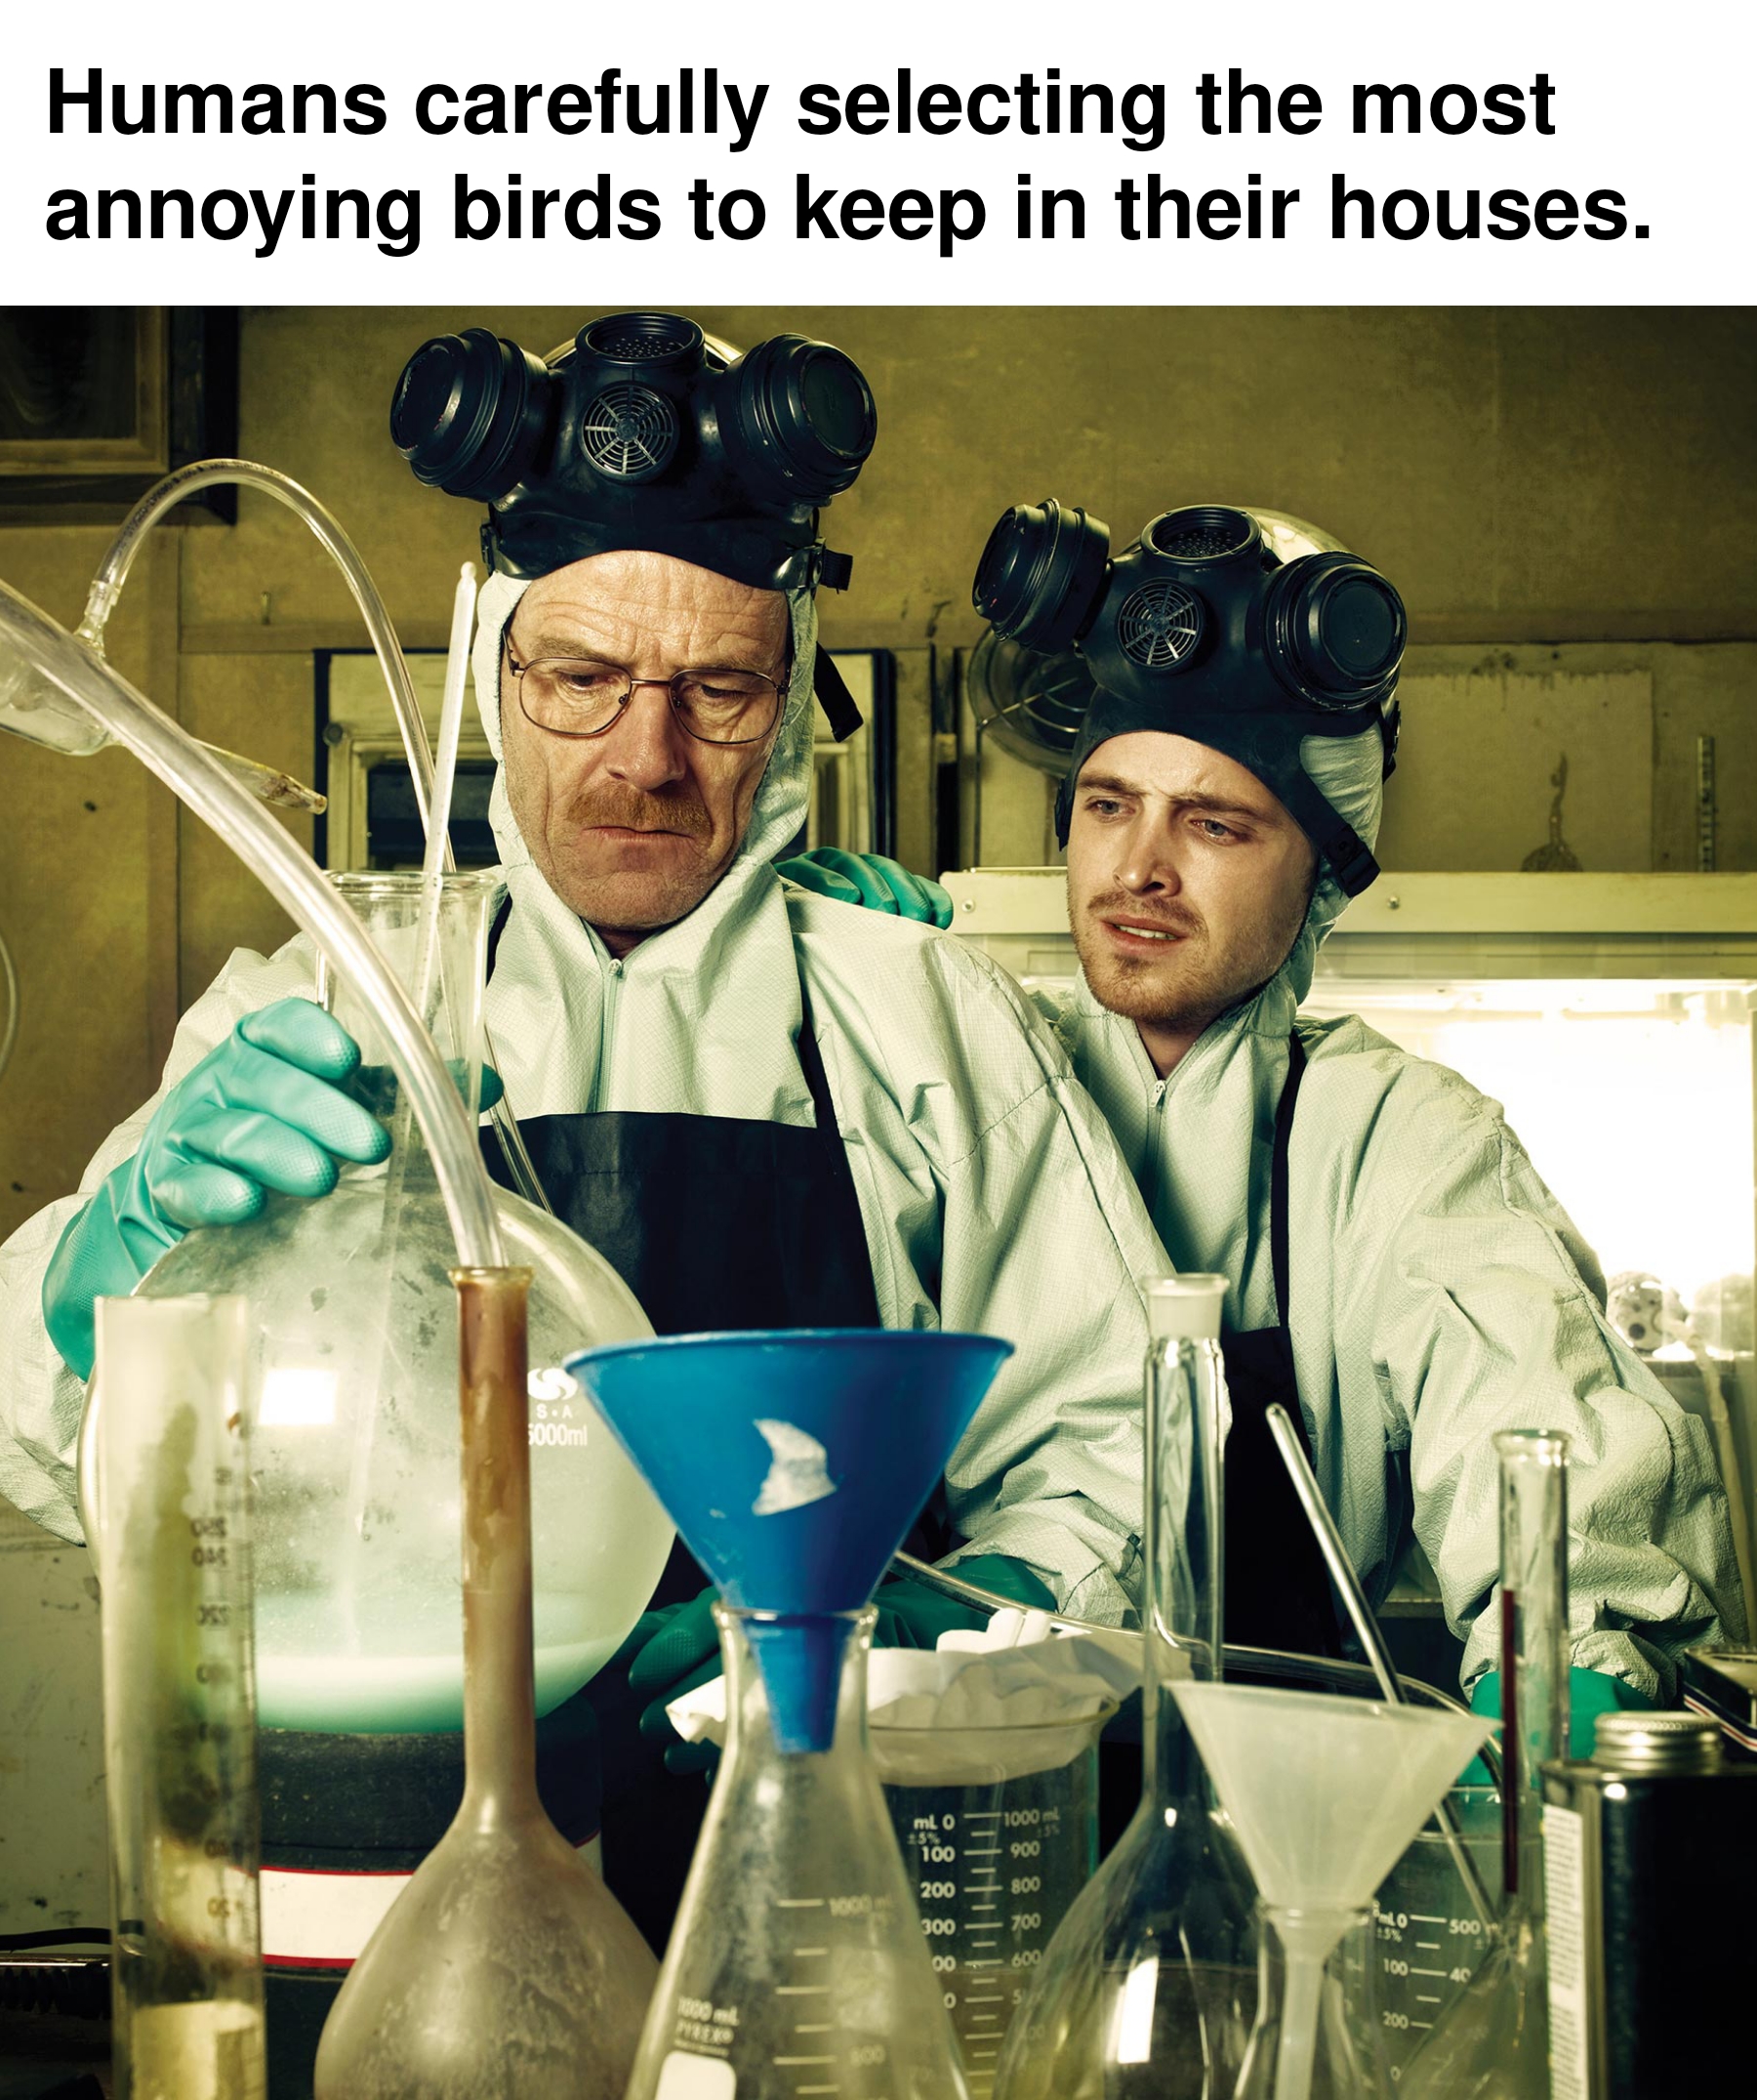 dank memes - meth lab breaking bad - Humans carefully selecting the most annoying birds to keep in their houses.